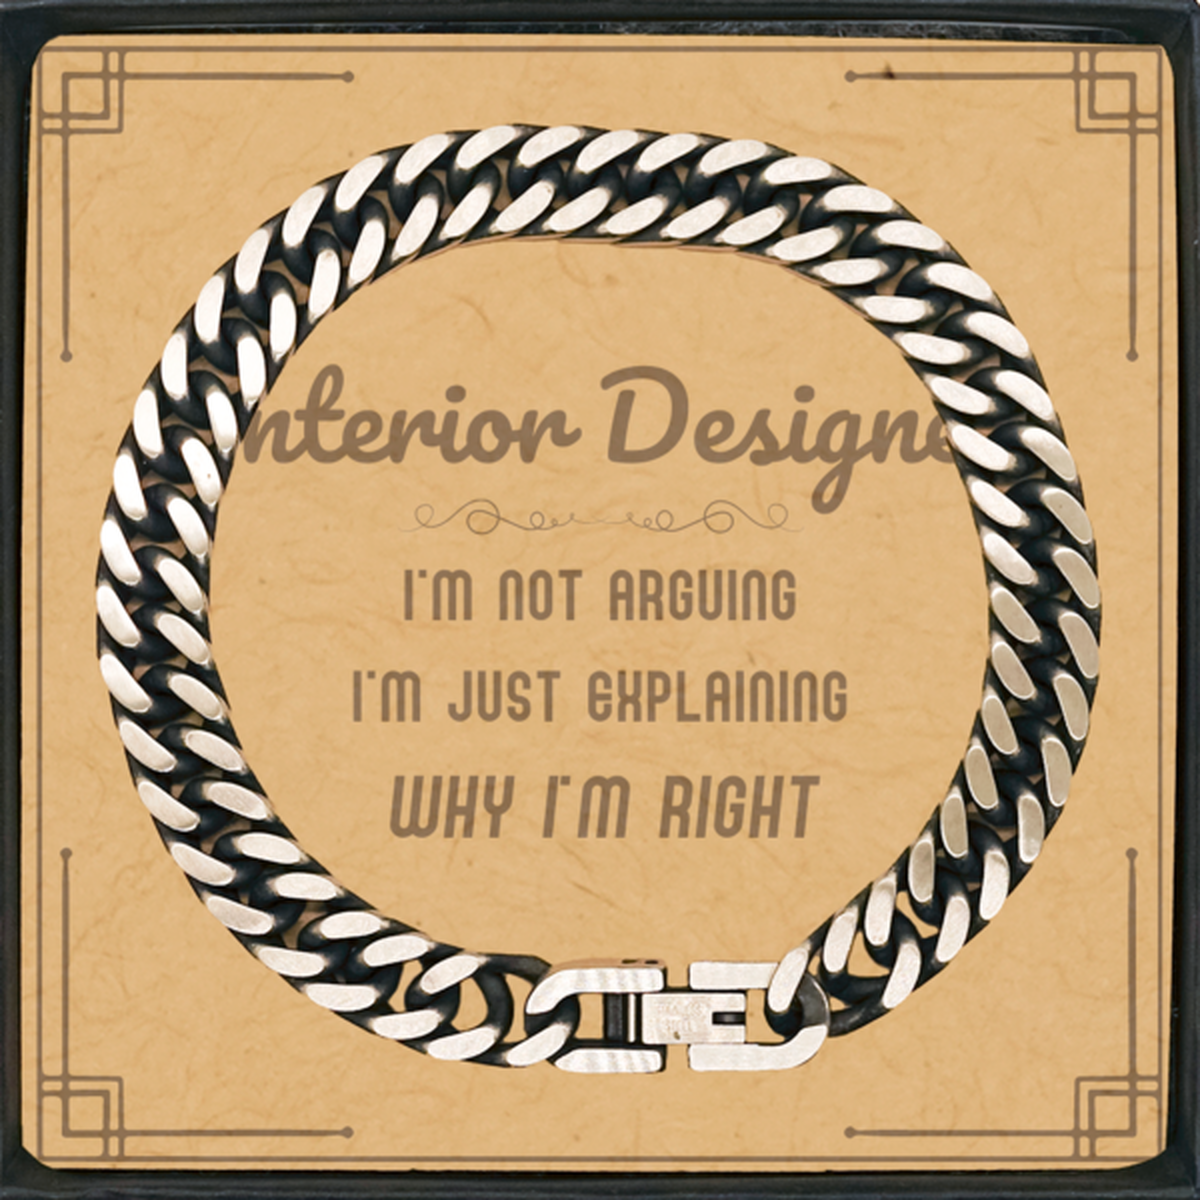 Interior Designer I'm not Arguing. I'm Just Explaining Why I'm RIGHT Cuban Link Chain Bracelet, Funny Saying Quote Interior Designer Gifts For Interior Designer Message Card Graduation Birthday Christmas Gifts for Men Women Coworker